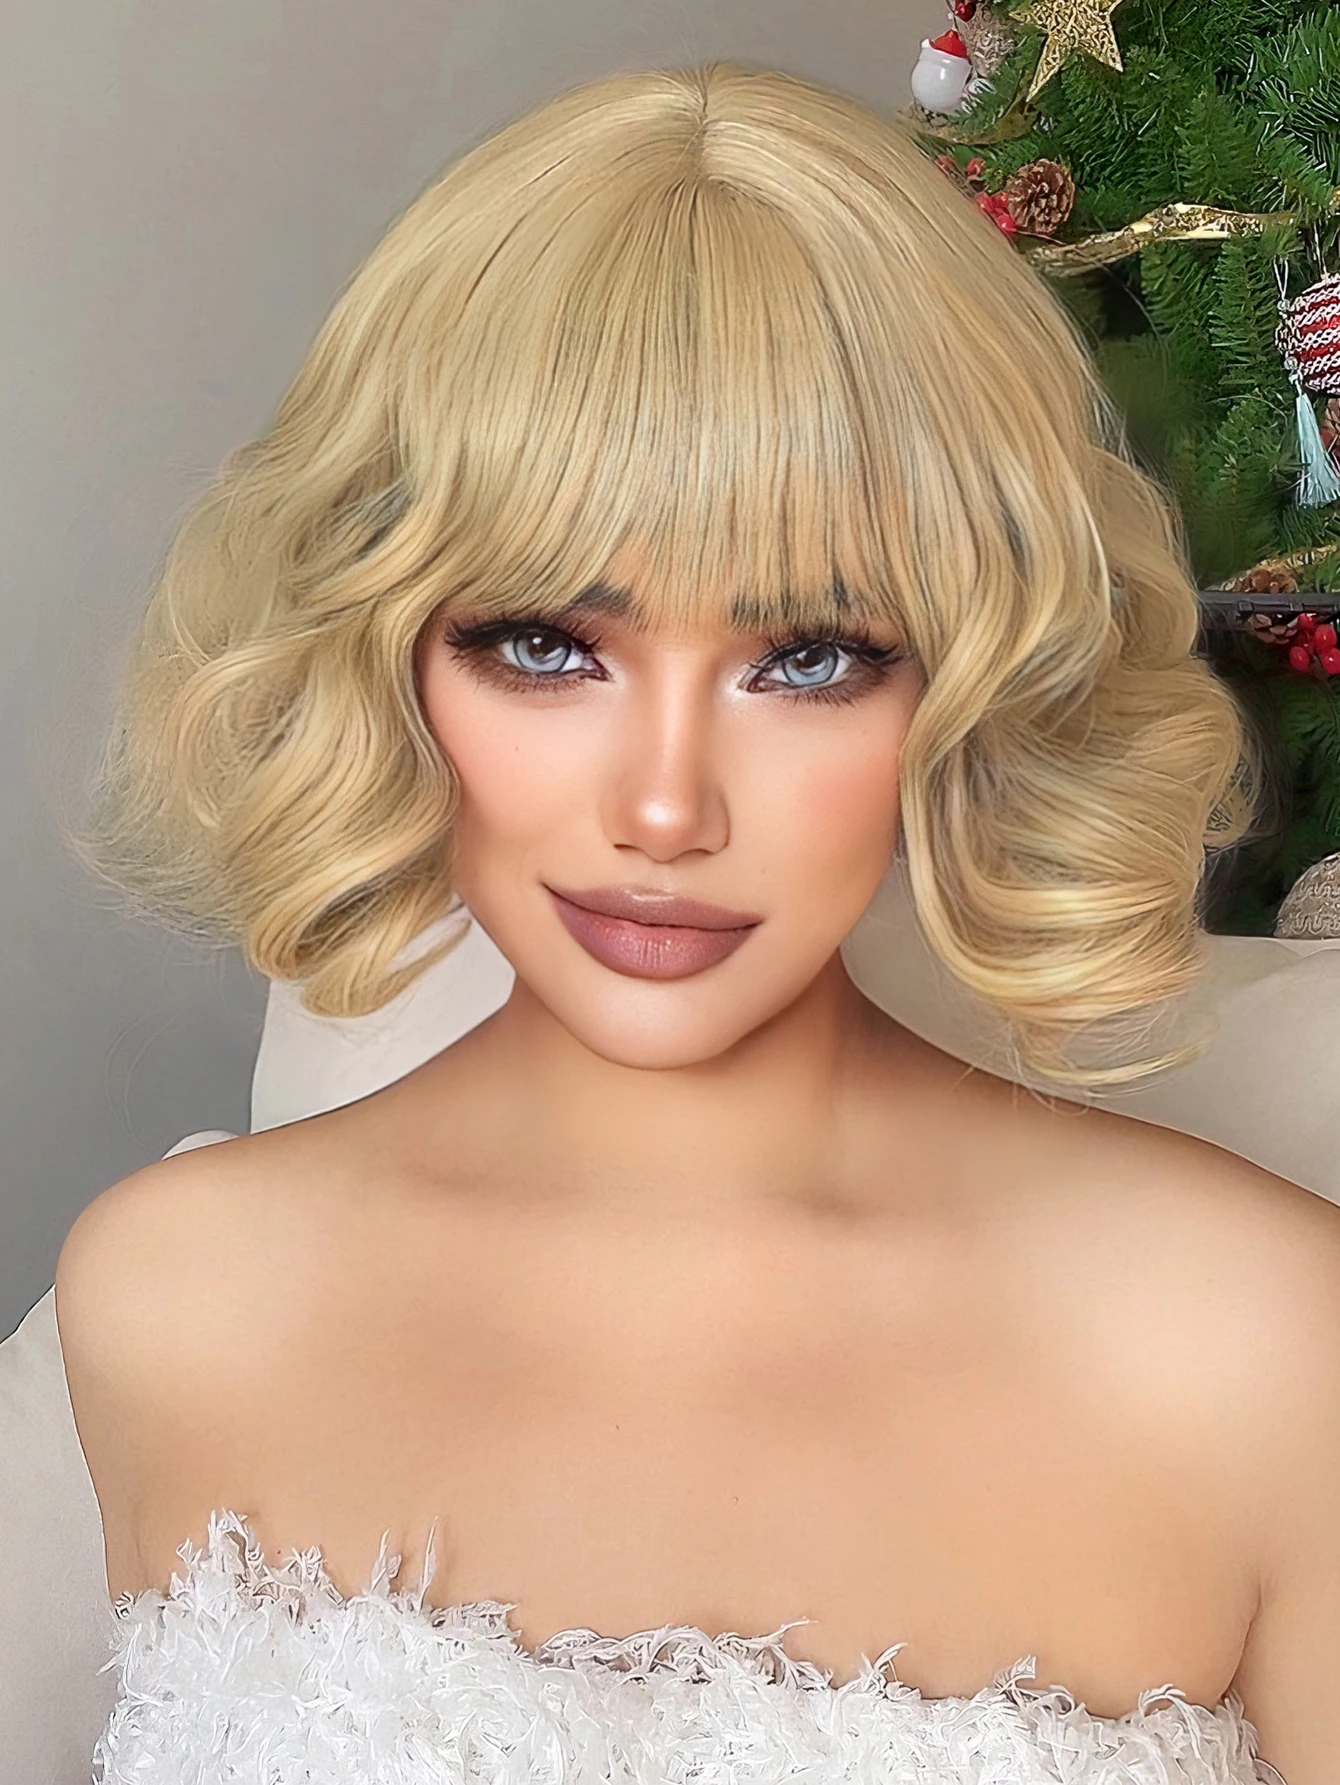 

12Inch Blond Color Synthetic Wigs With Bang Short Natural Curly Hair Wig For Women Cosplay Daily Use Drag Queen Heat Resistant